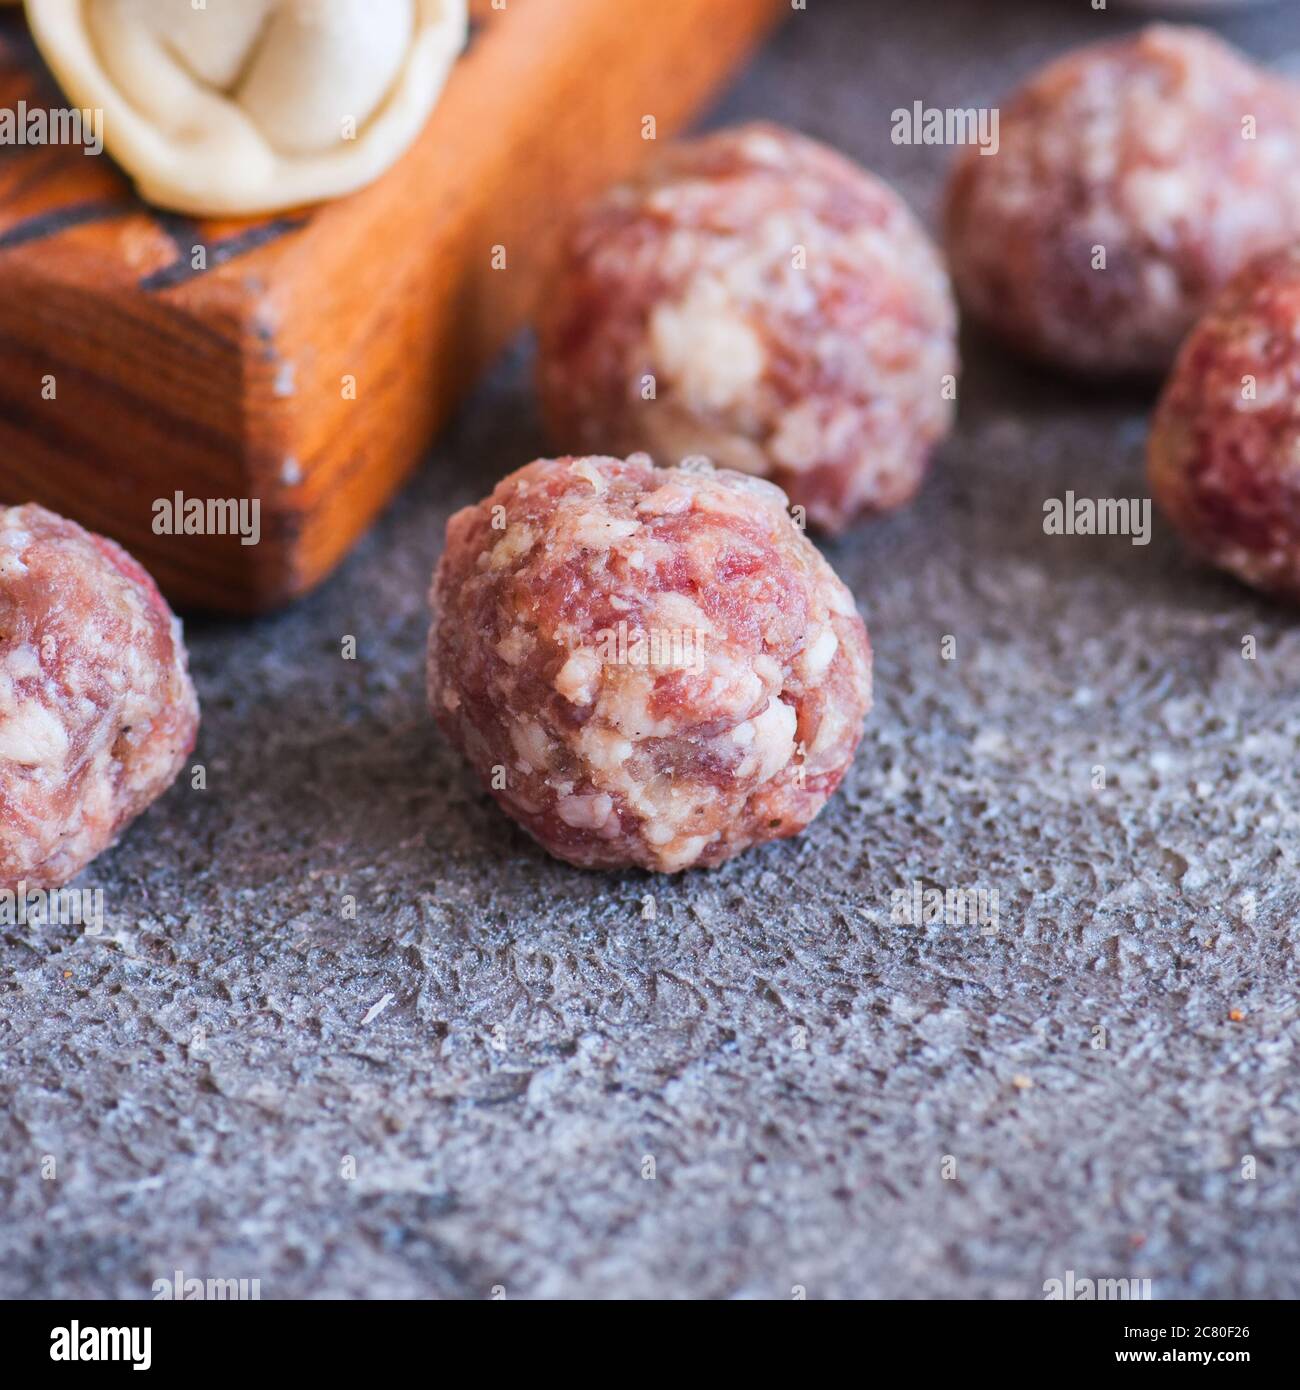 Raw homemade meatballs. Close up, frozen food concept. Stock Photo